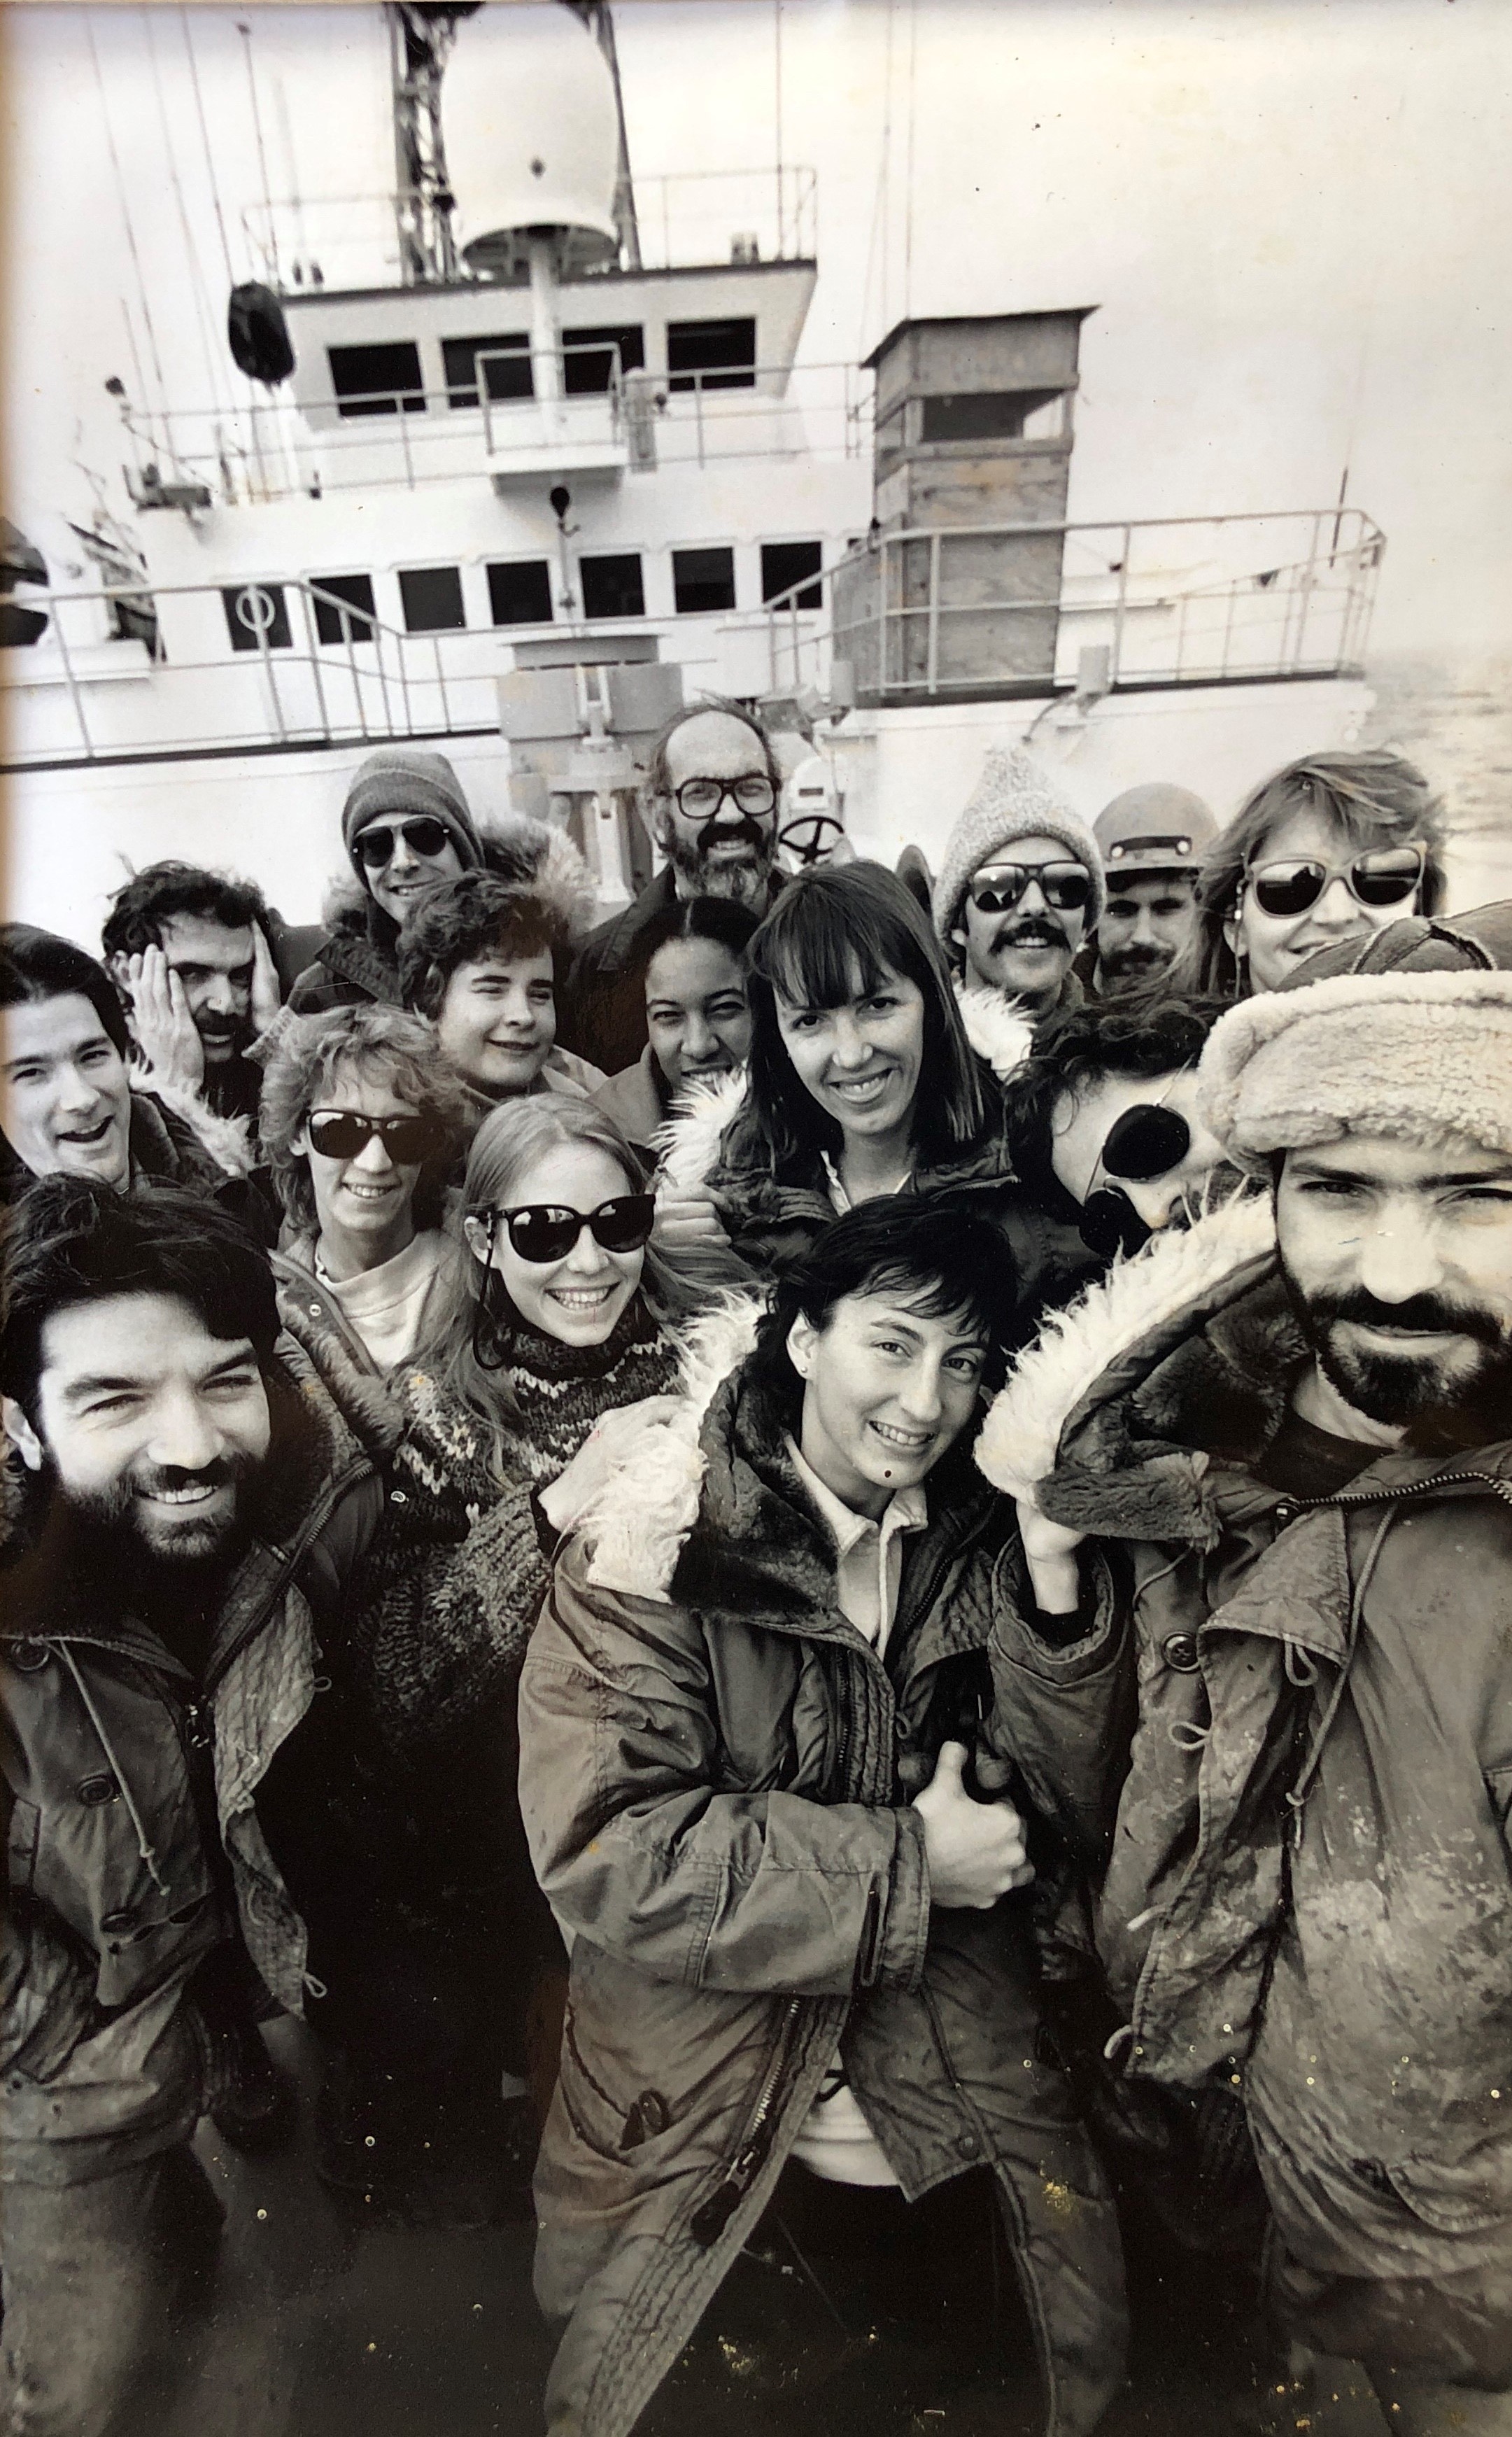 Crew of Ocean Drilling Program marine technicians who sailed on Leg 113 to the Weddell Sea, Antarctica, December 25, 1986 to March 11, 1987. Port calls were Punta Arenas, Chile to Stanley, Falkland Islands. Dawn is in middle rear of group.